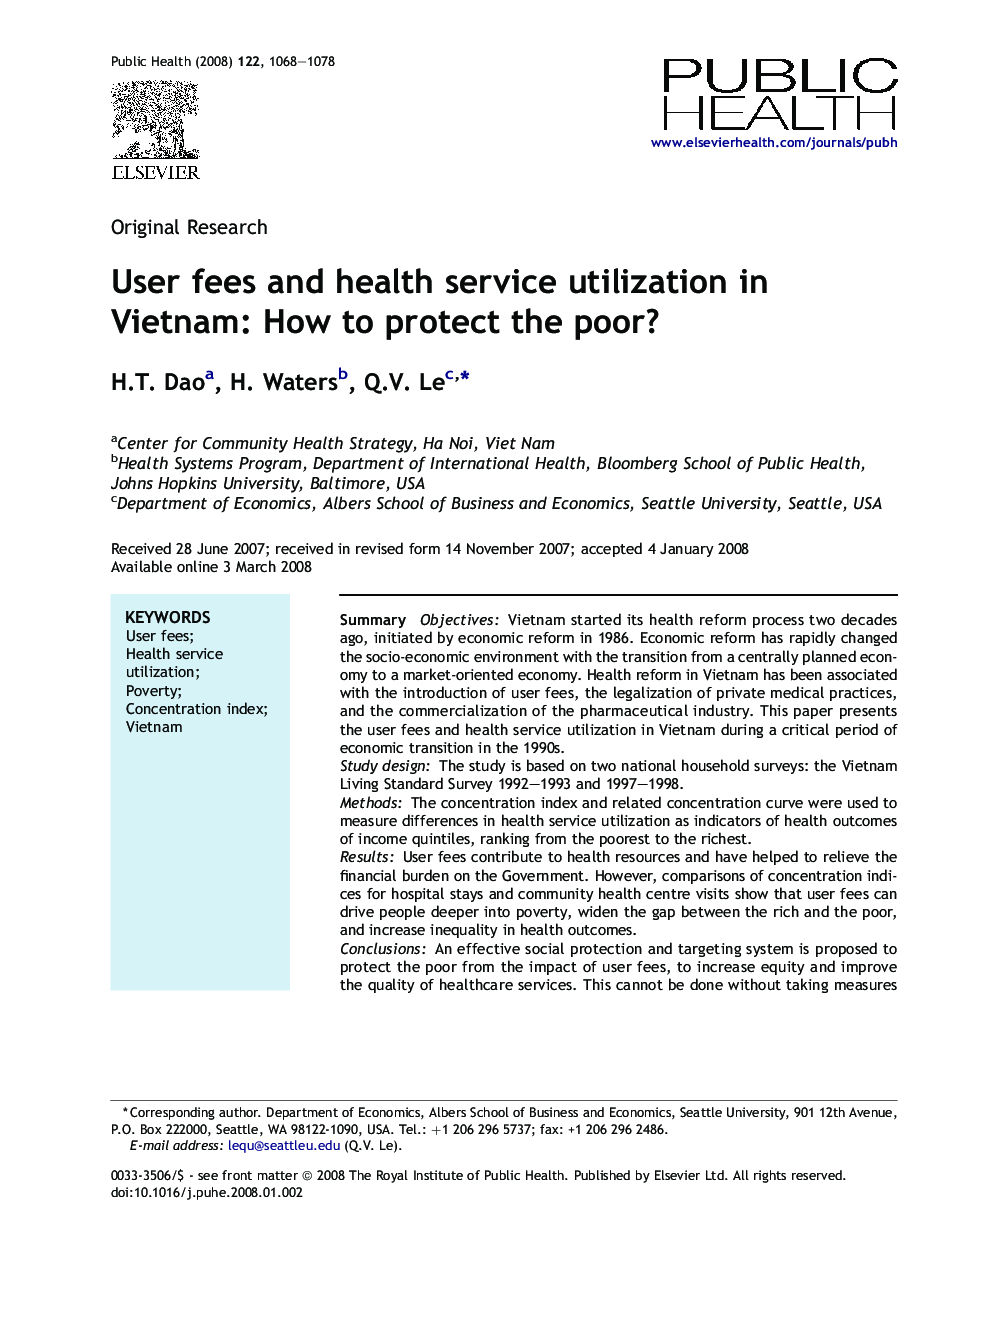 User fees and health service utilization in Vietnam: How to protect the poor?